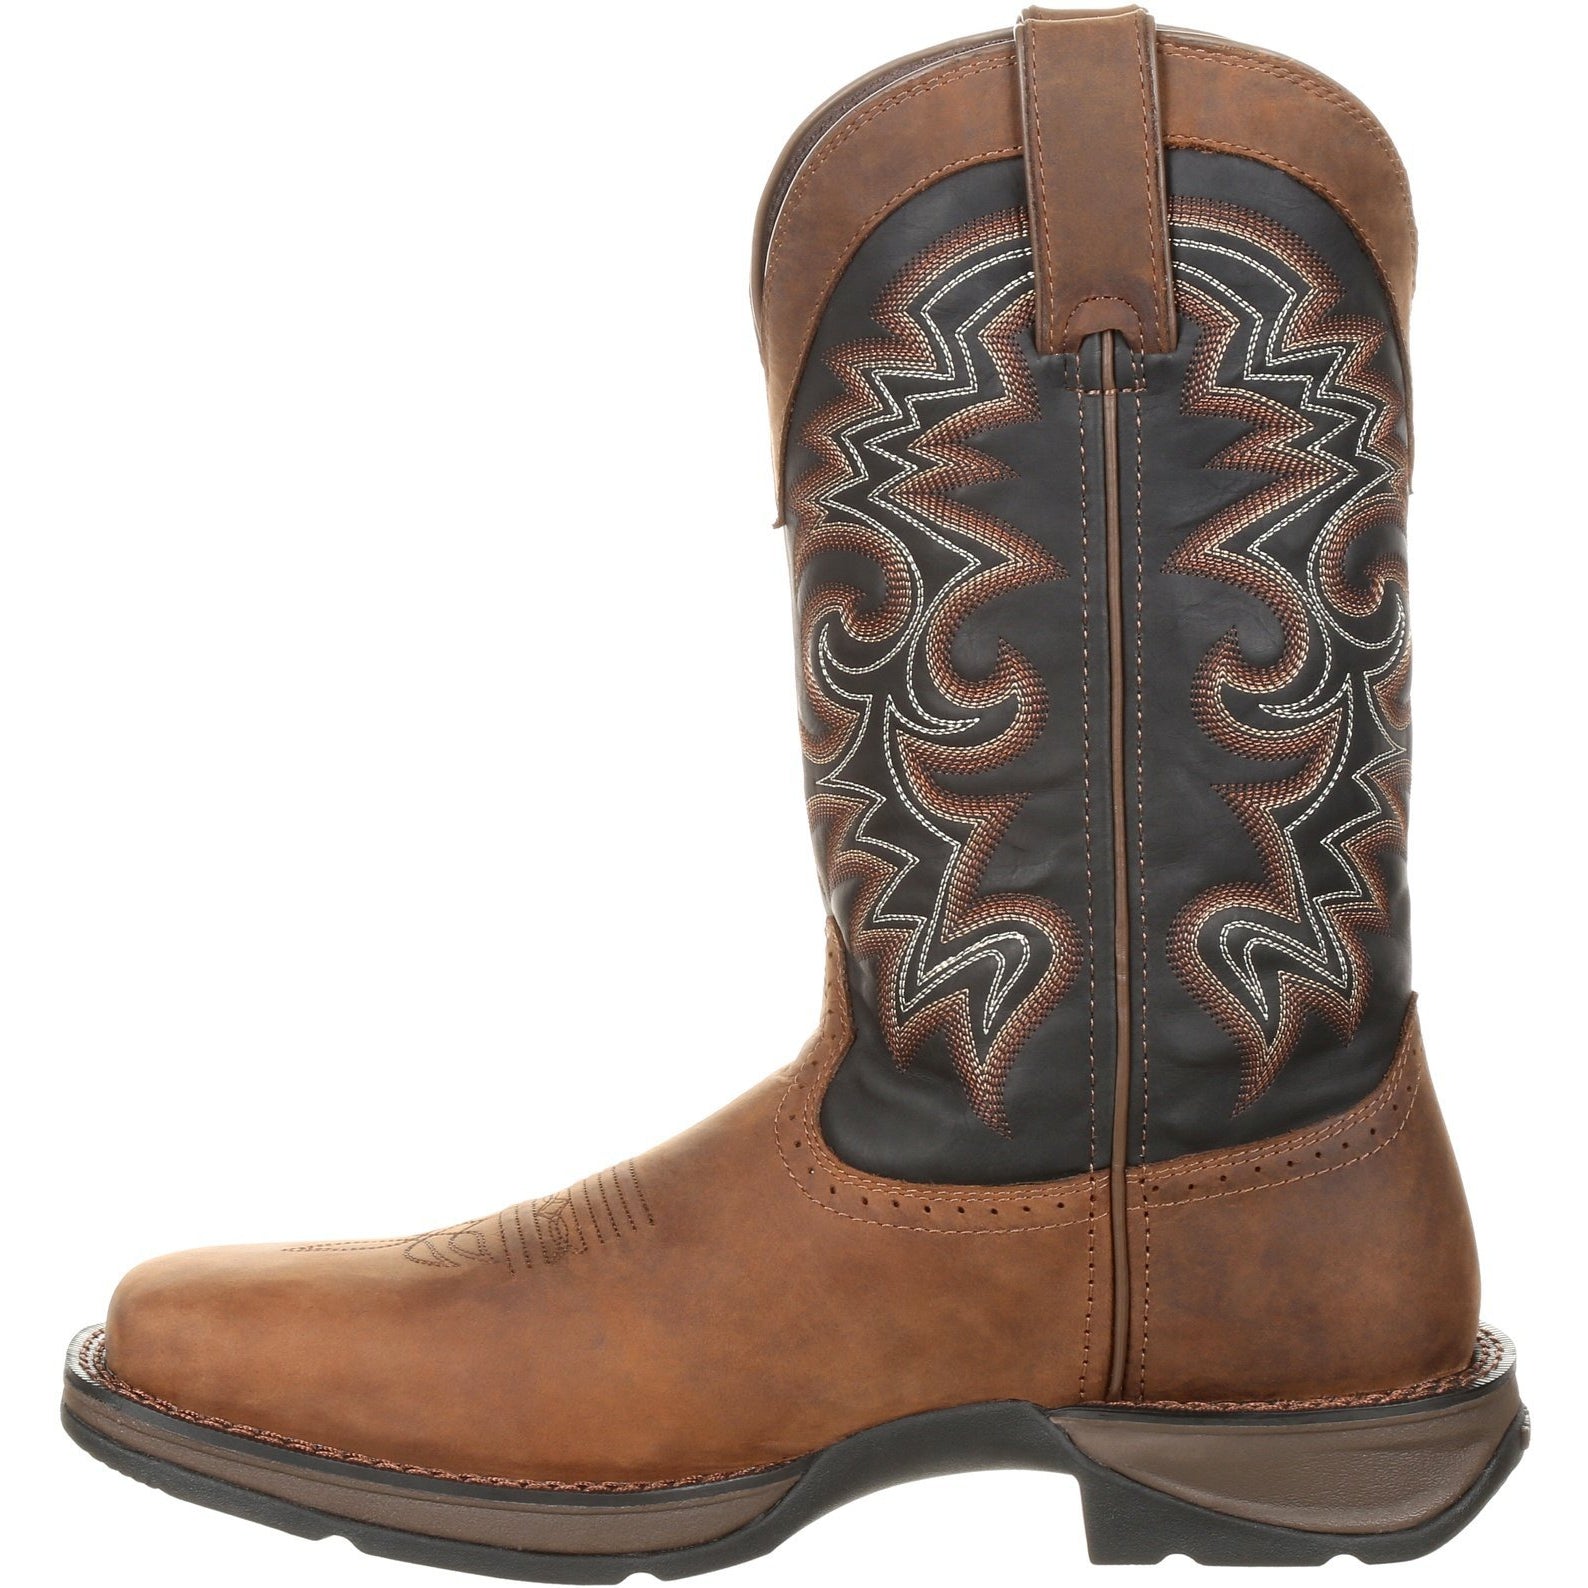 Durango Men's Rebel 12" Square Toe Pull-On Western Boot Chocolate DDB0135  - Overlook Boots